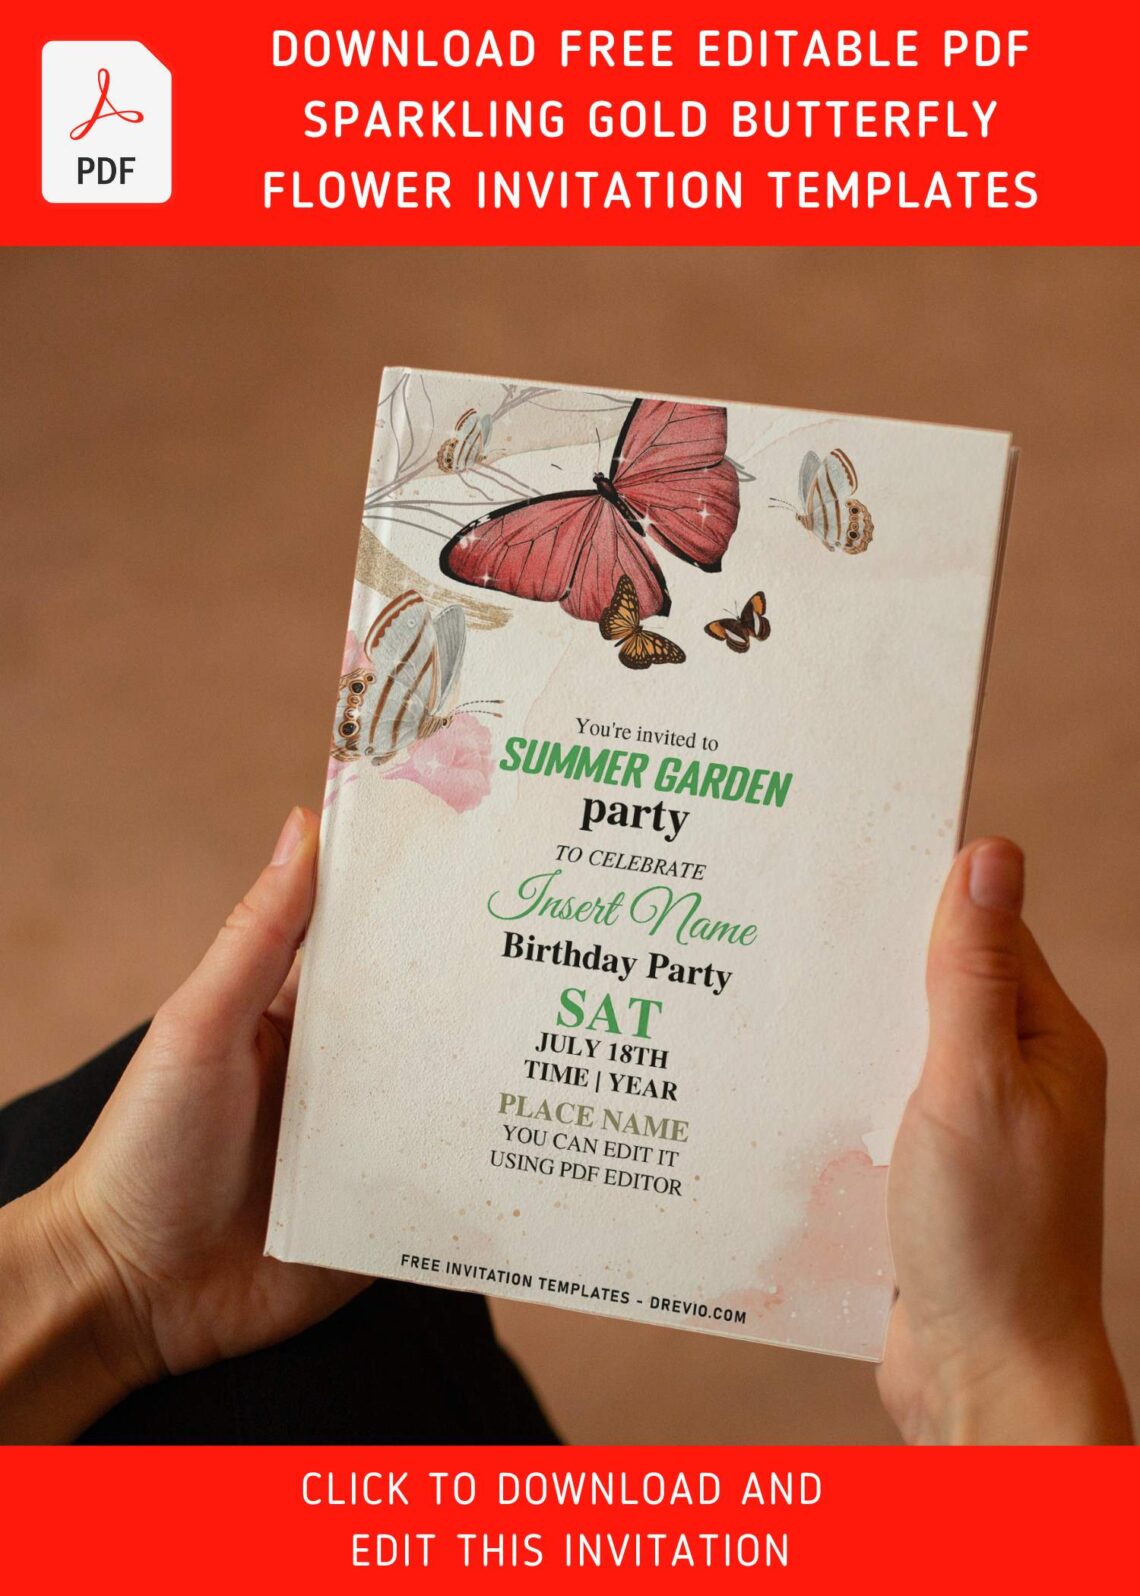 (Free Editable PDF) Blushing Boho Butterfly And Floral Birthday Invitation Templates with watercolor butterfly